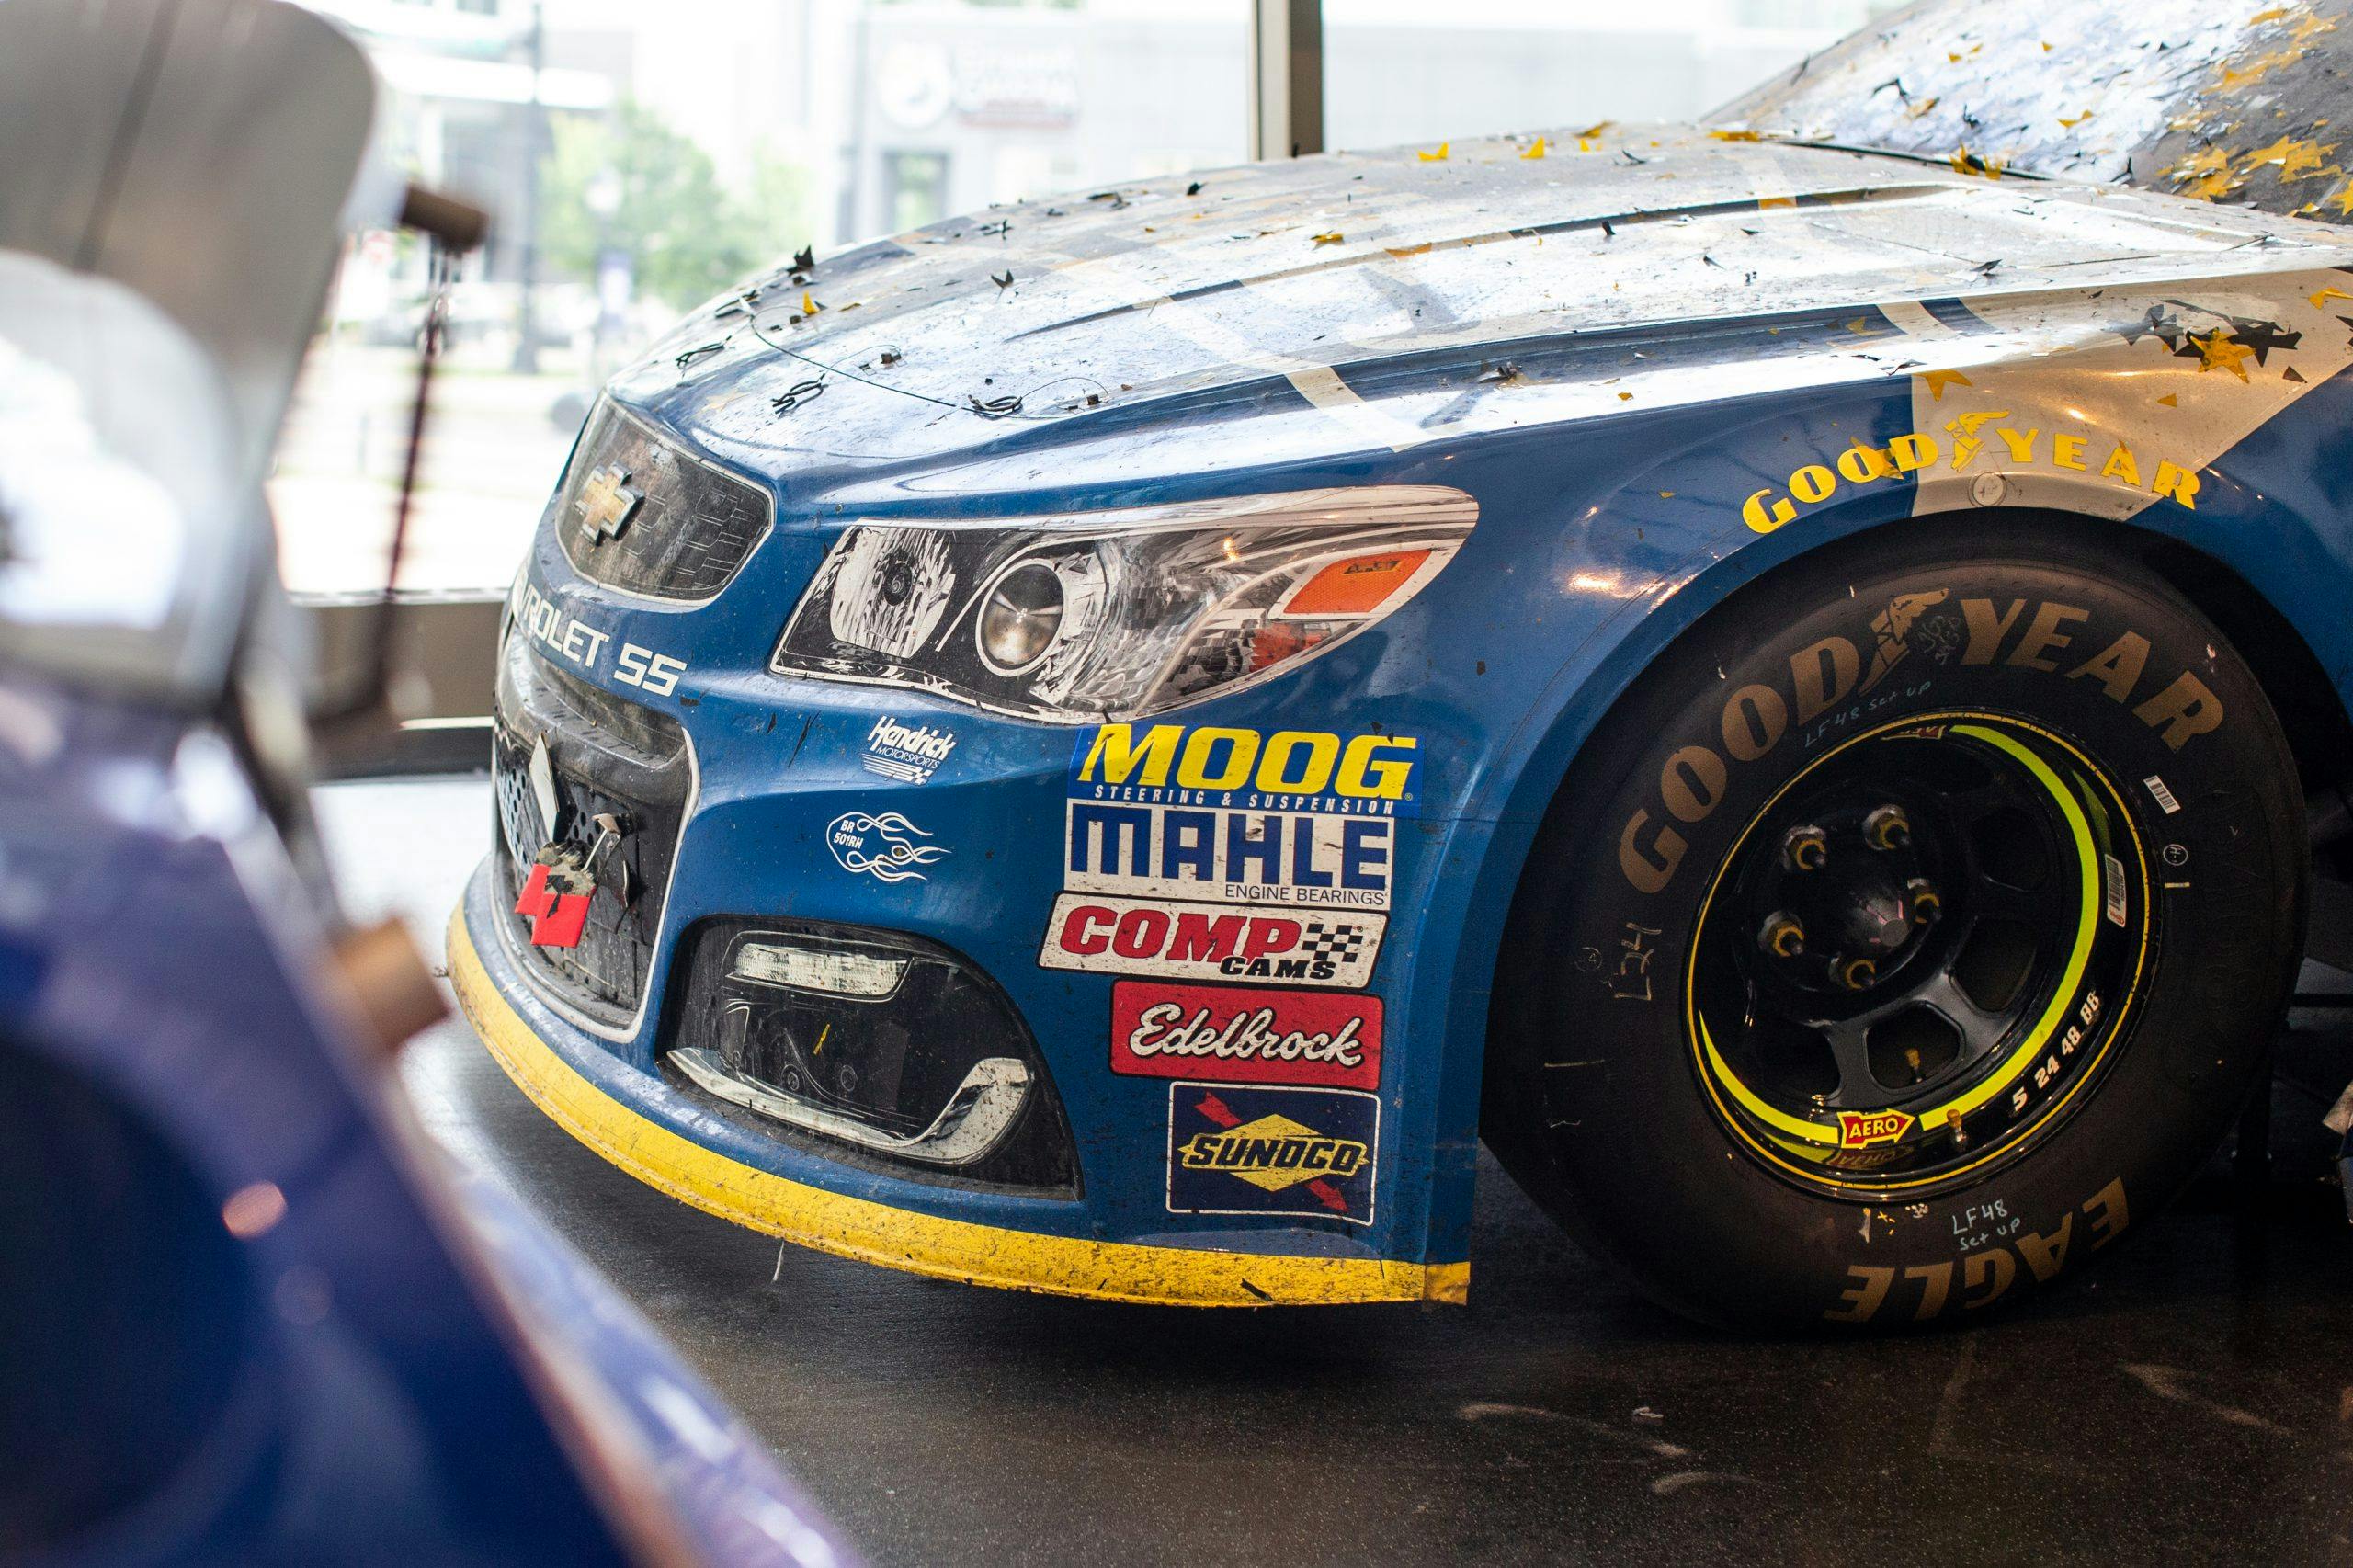 NASCAR Hall of Fame Jimmie Johnson Lowes race car front end closeup